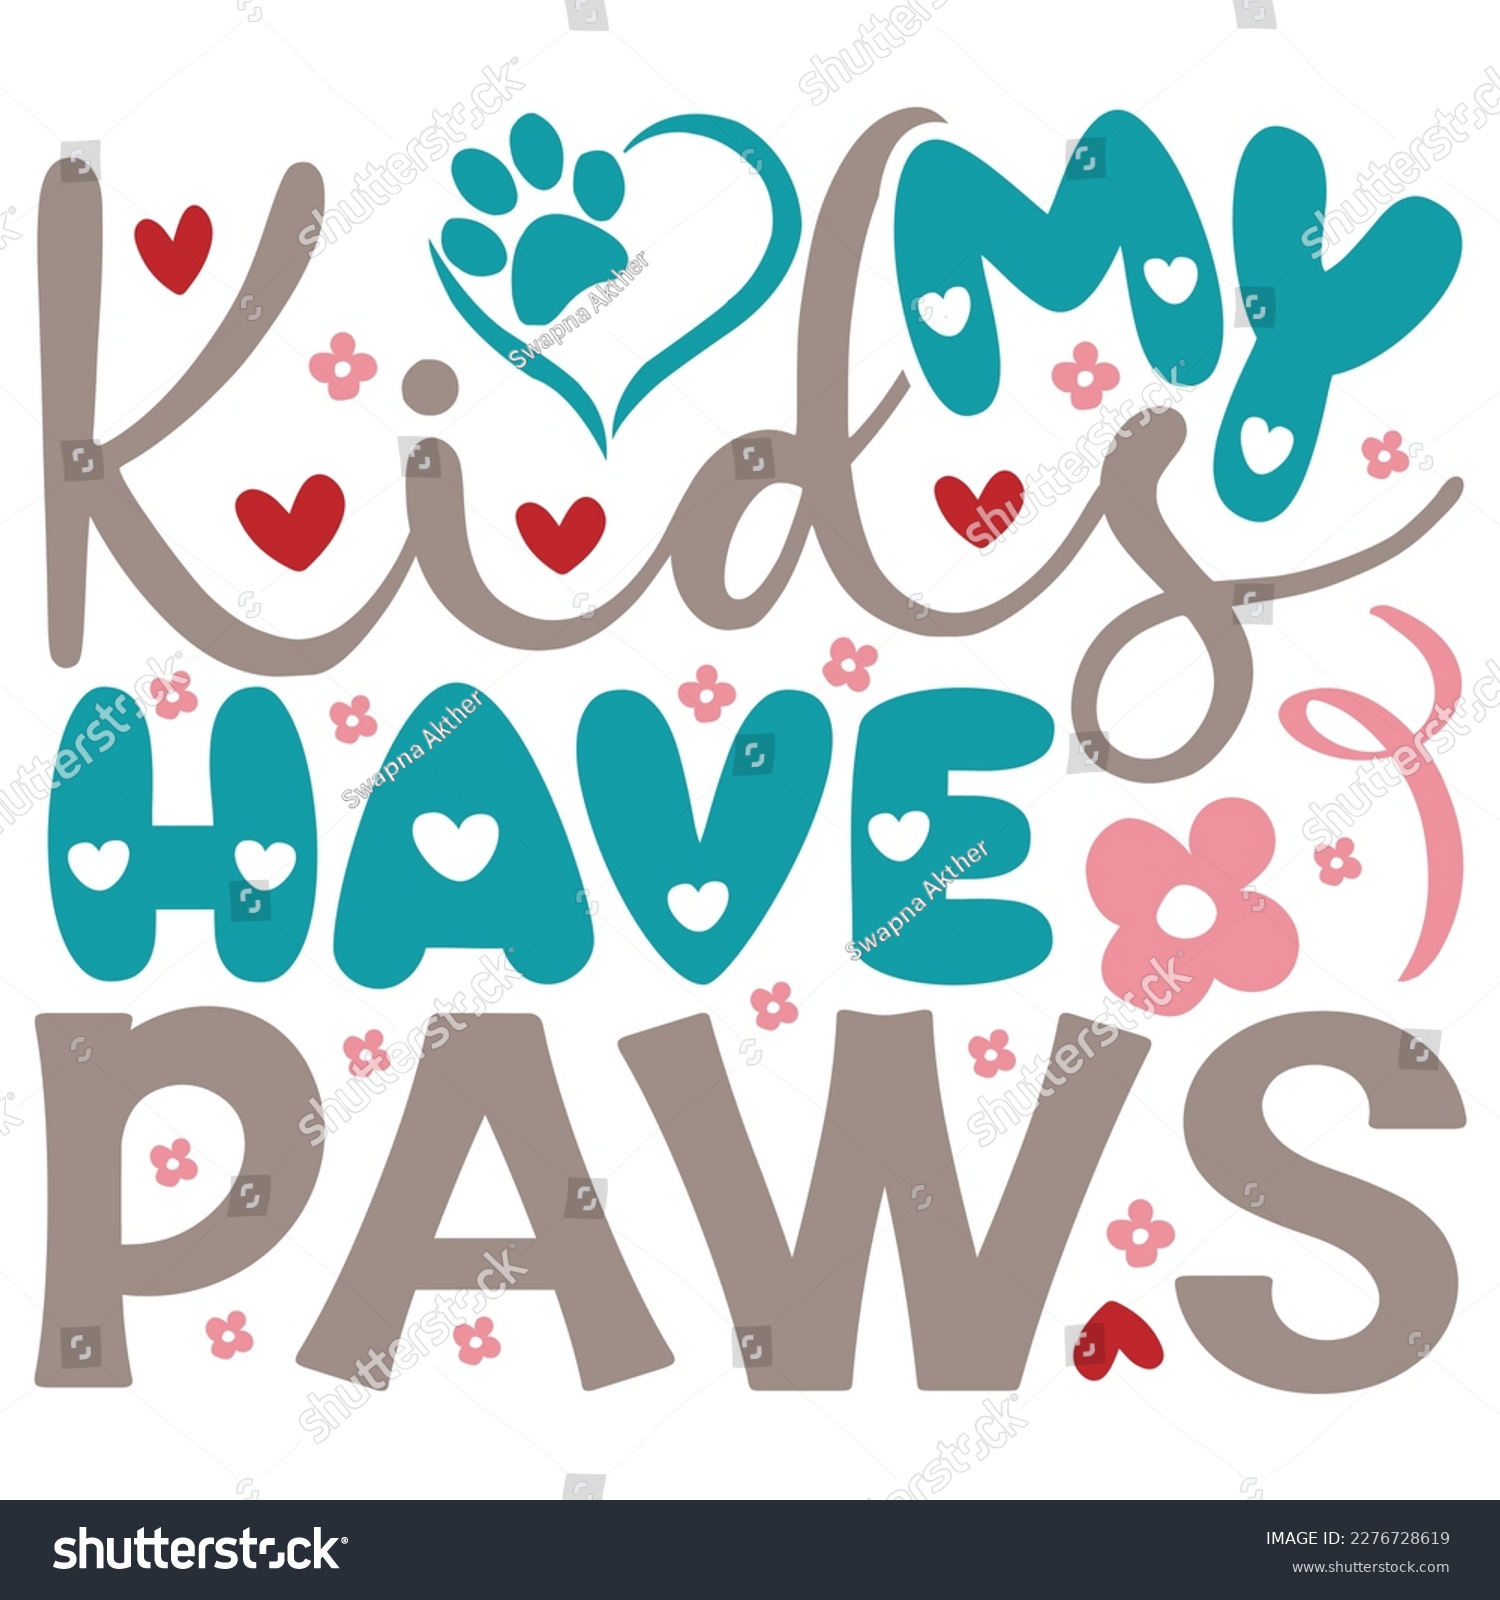 SVG of My Kids Have Paws - Boho Retro Style Dog T-shirt And SVG Design. Dog SVG Quotes T shirt Design, Vector EPS Editable Files, Can You Download This File. svg